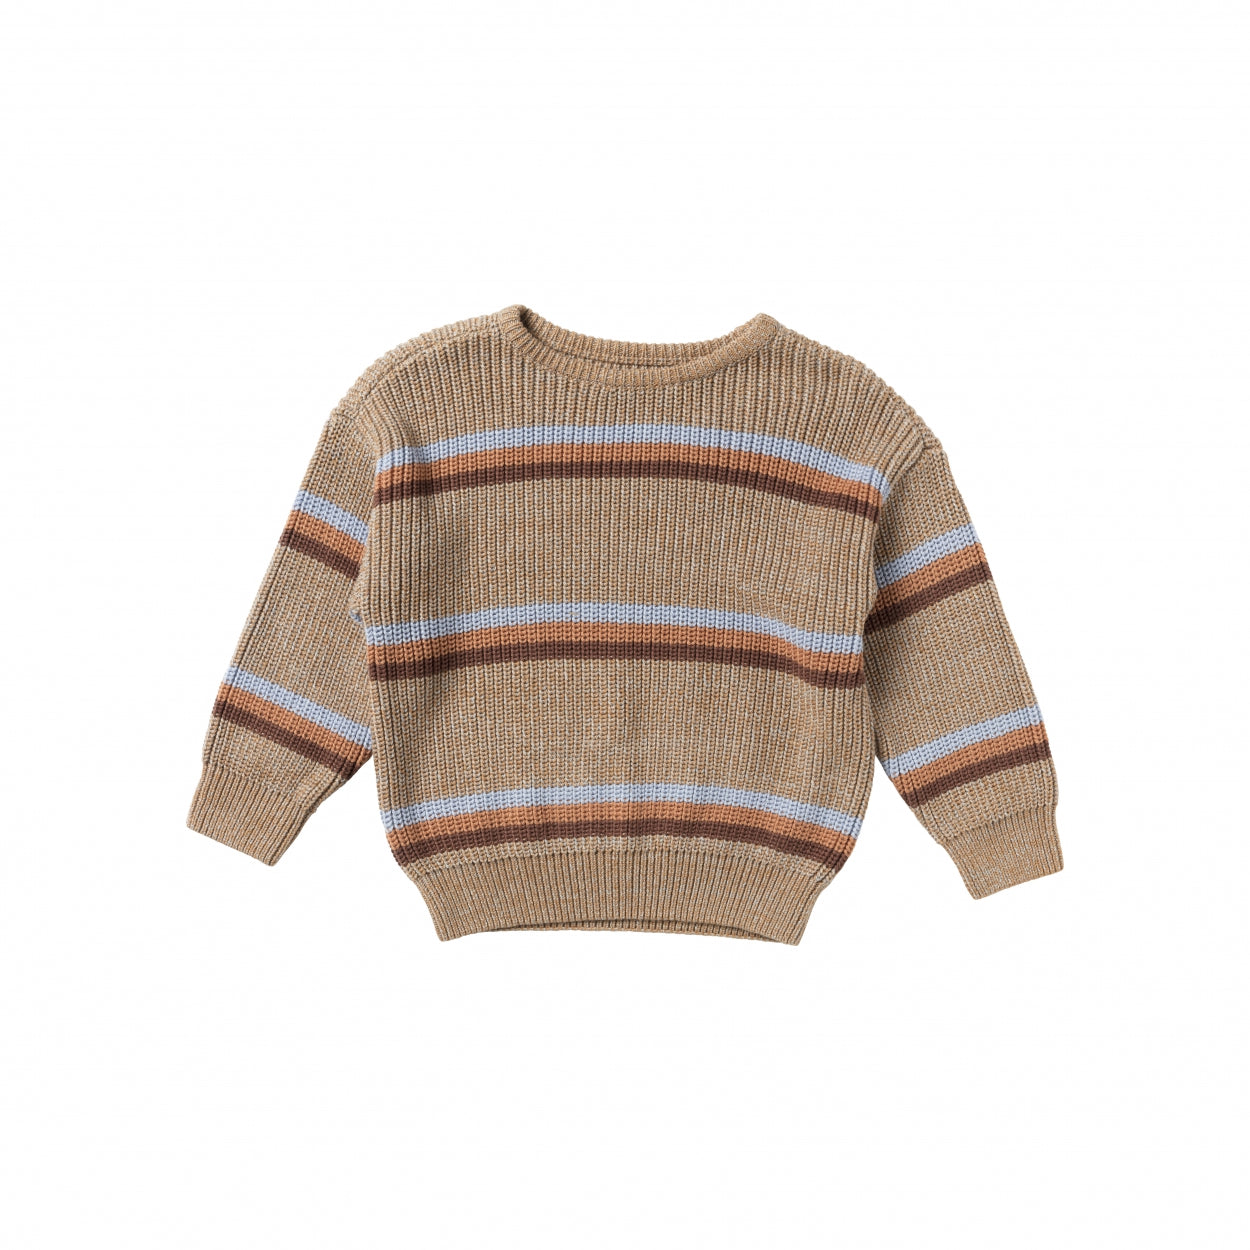 Sweater knit Mike